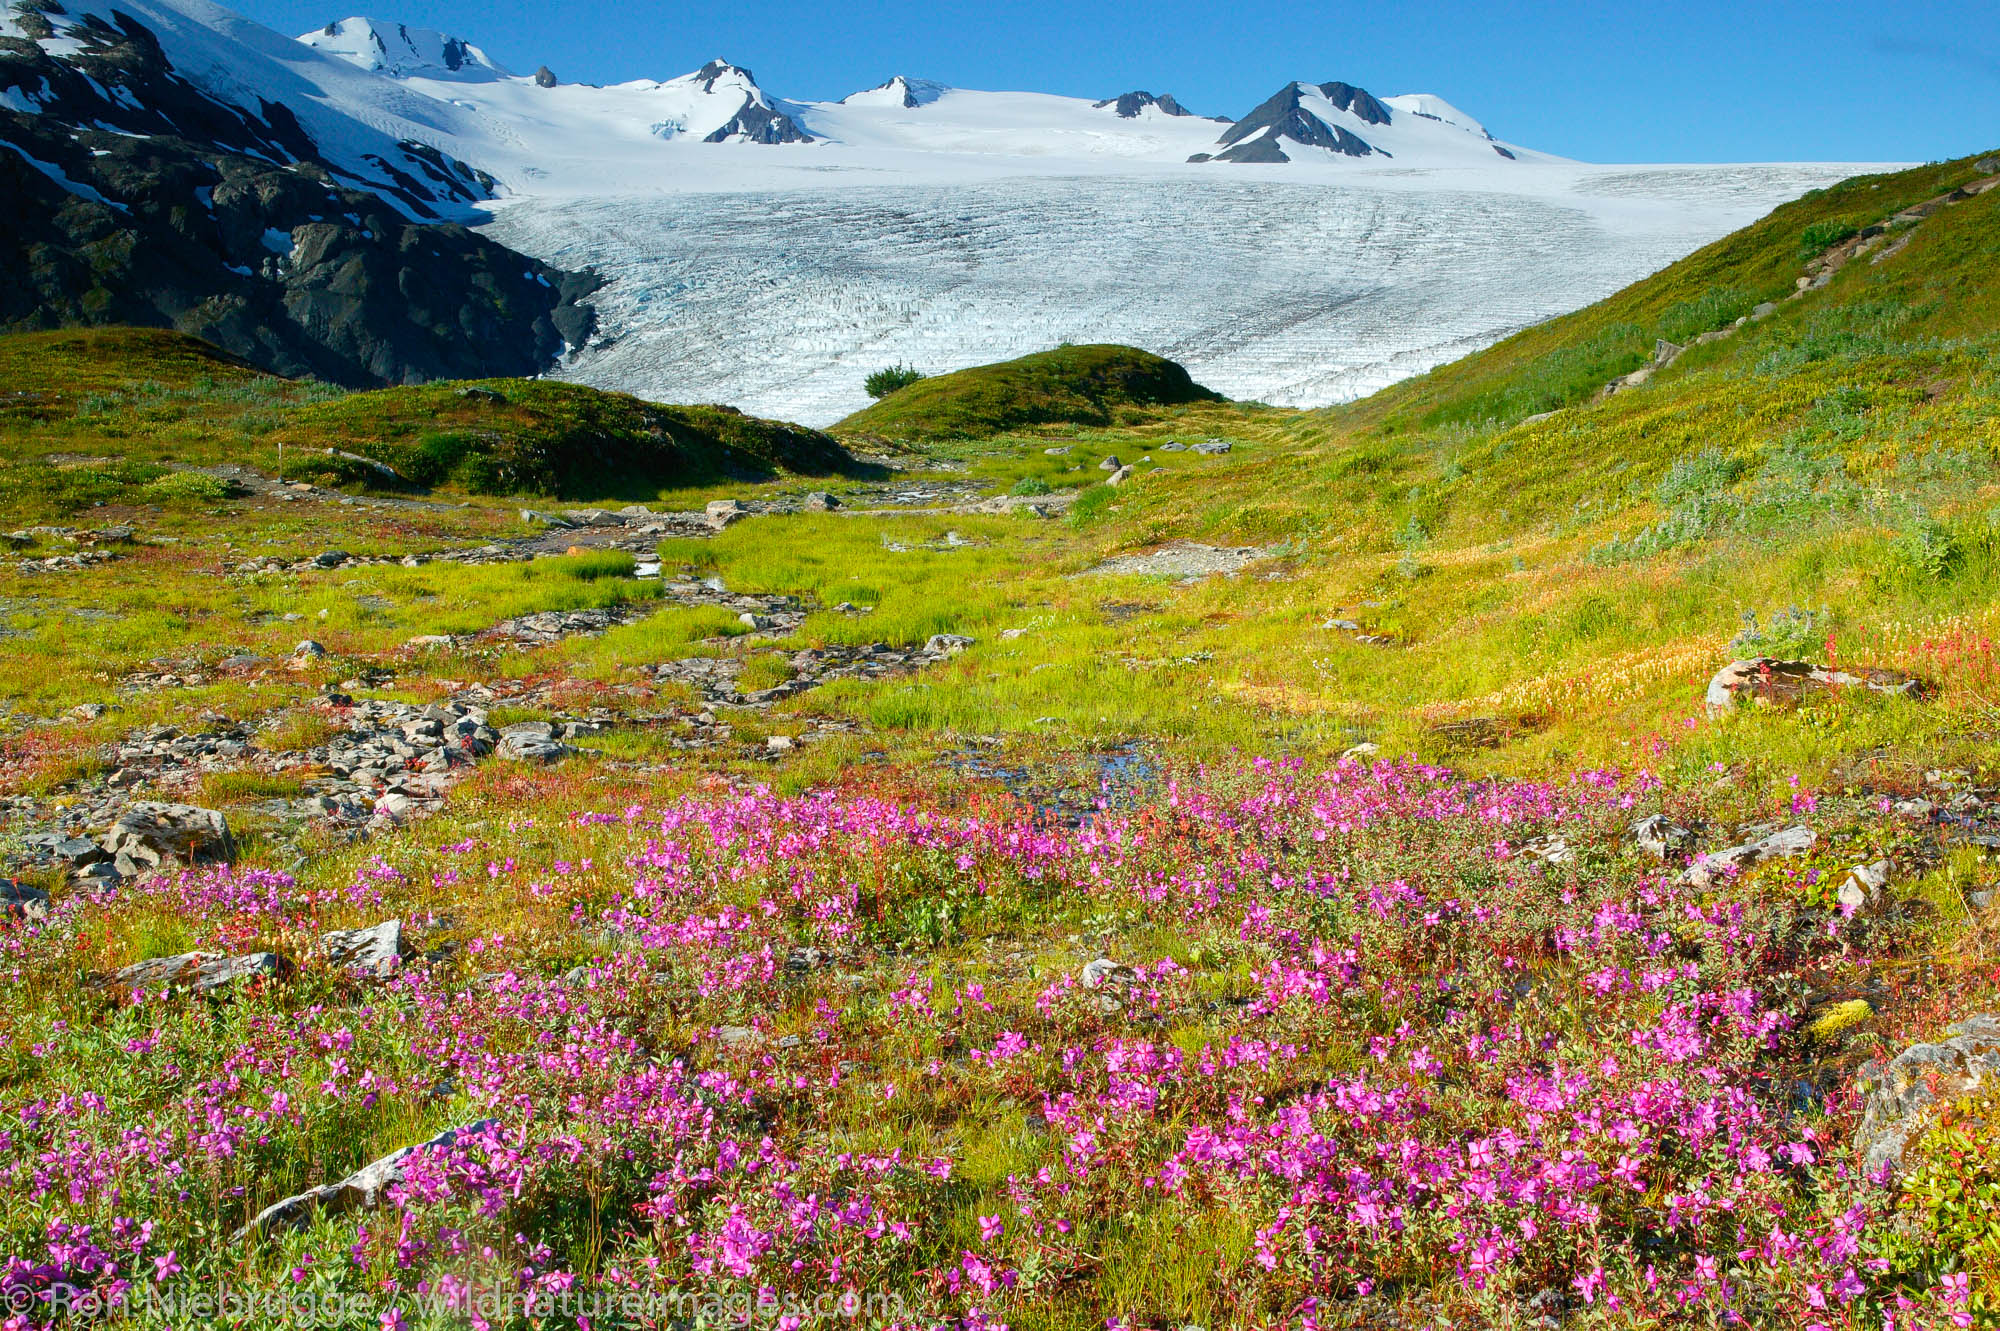 Wildflowers along Exit Glacier and the Harding Icefield trail, Kenai Fjords National Park, Alaska.